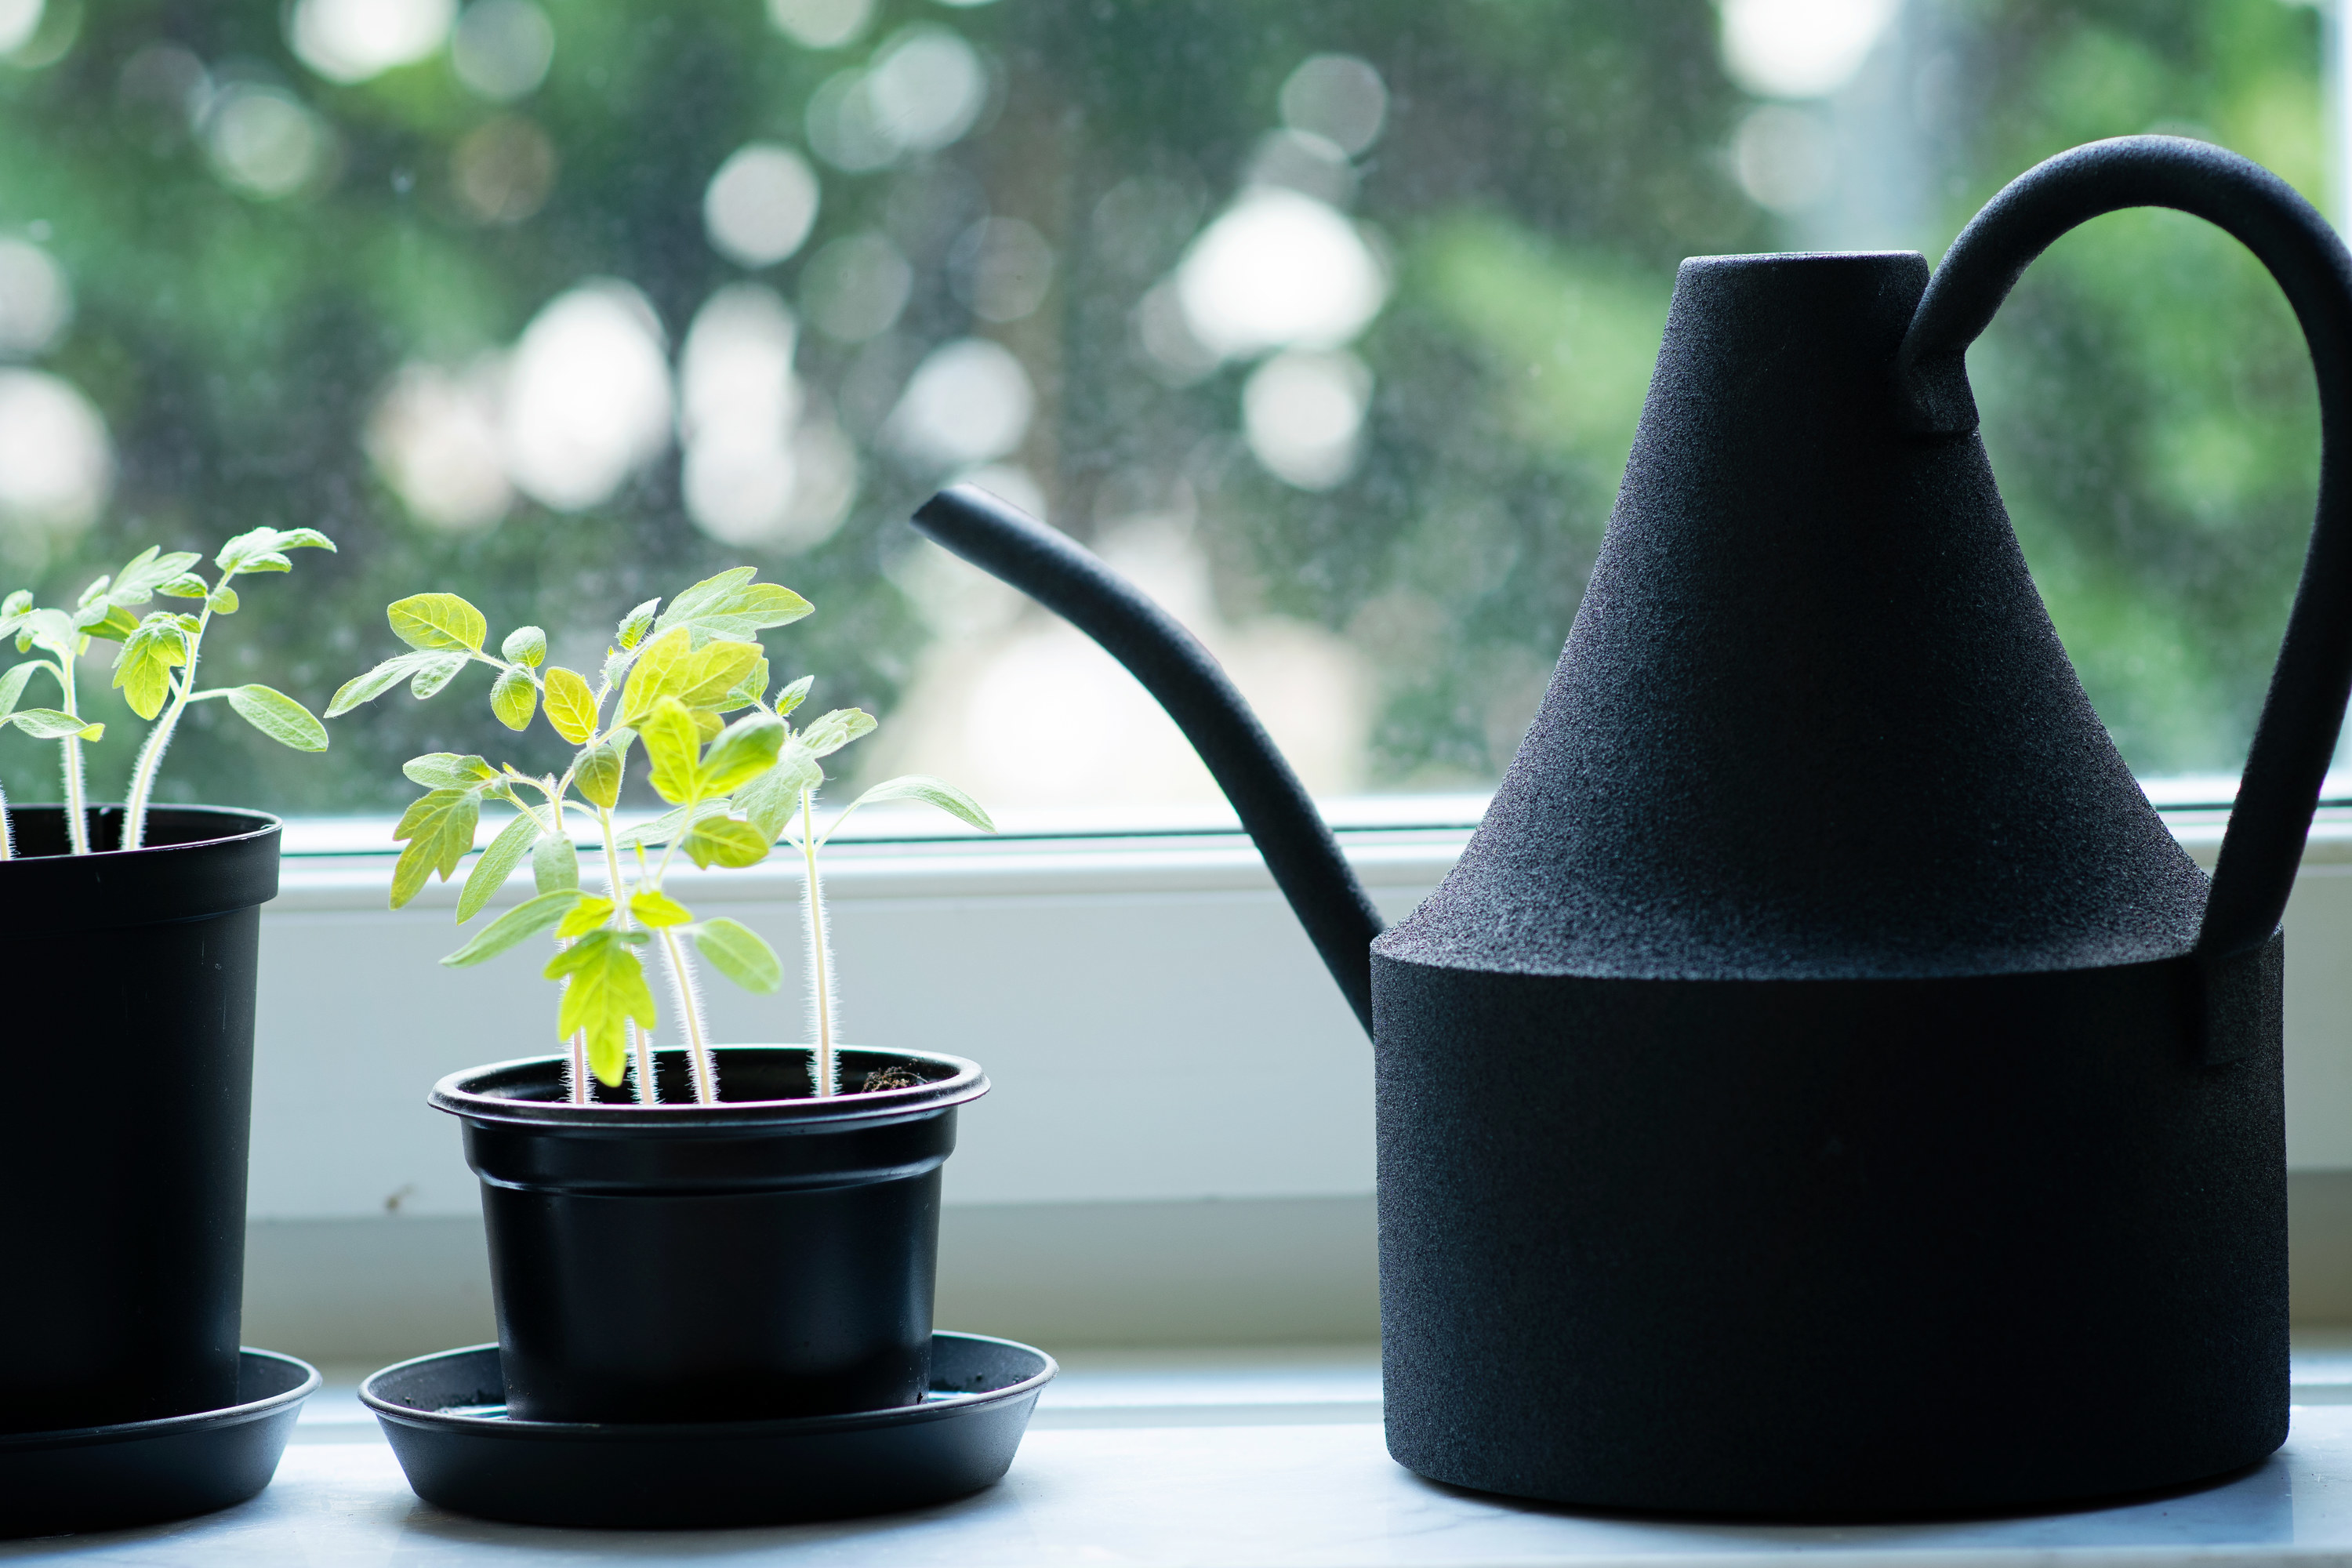 Two small herb plants and a black watering can on a windowsill